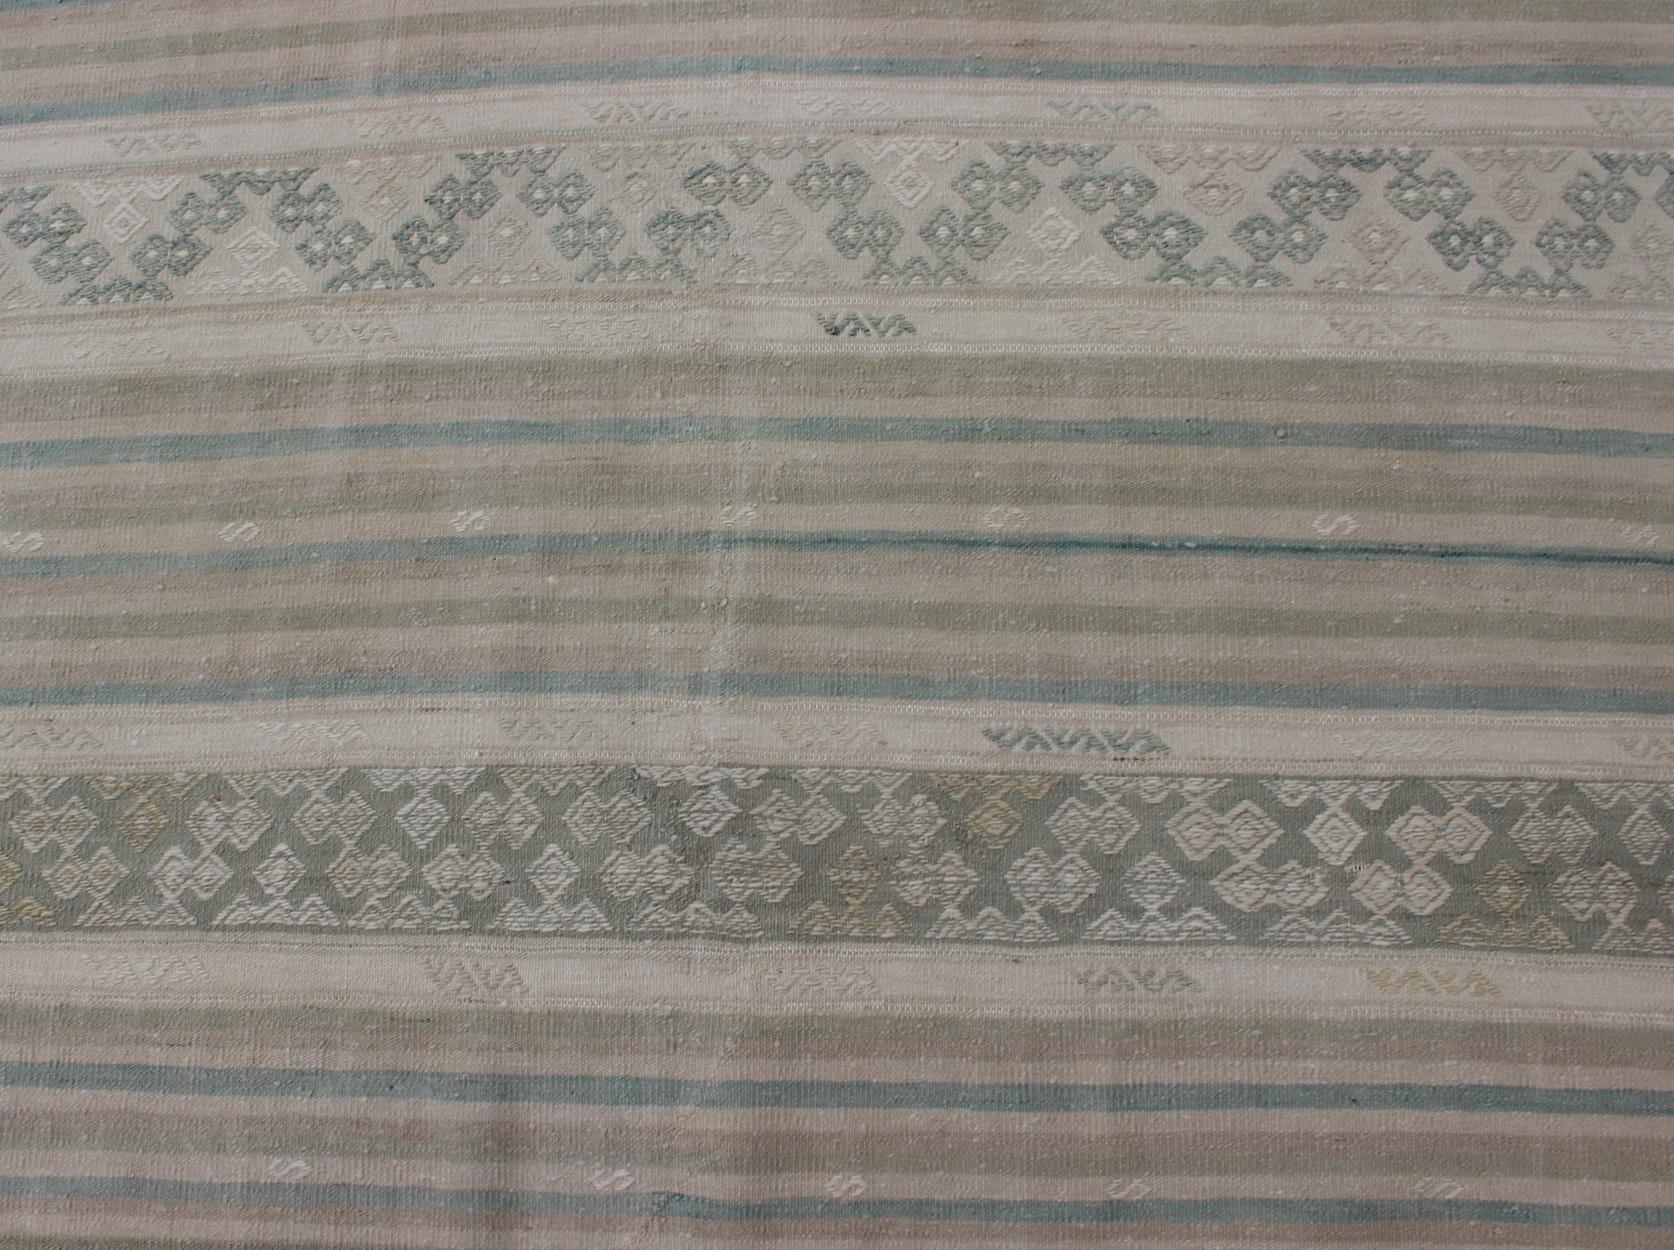 Turkish Flat-Weave Kilim in Muted Colors with Stripes and Embroideries For Sale 3